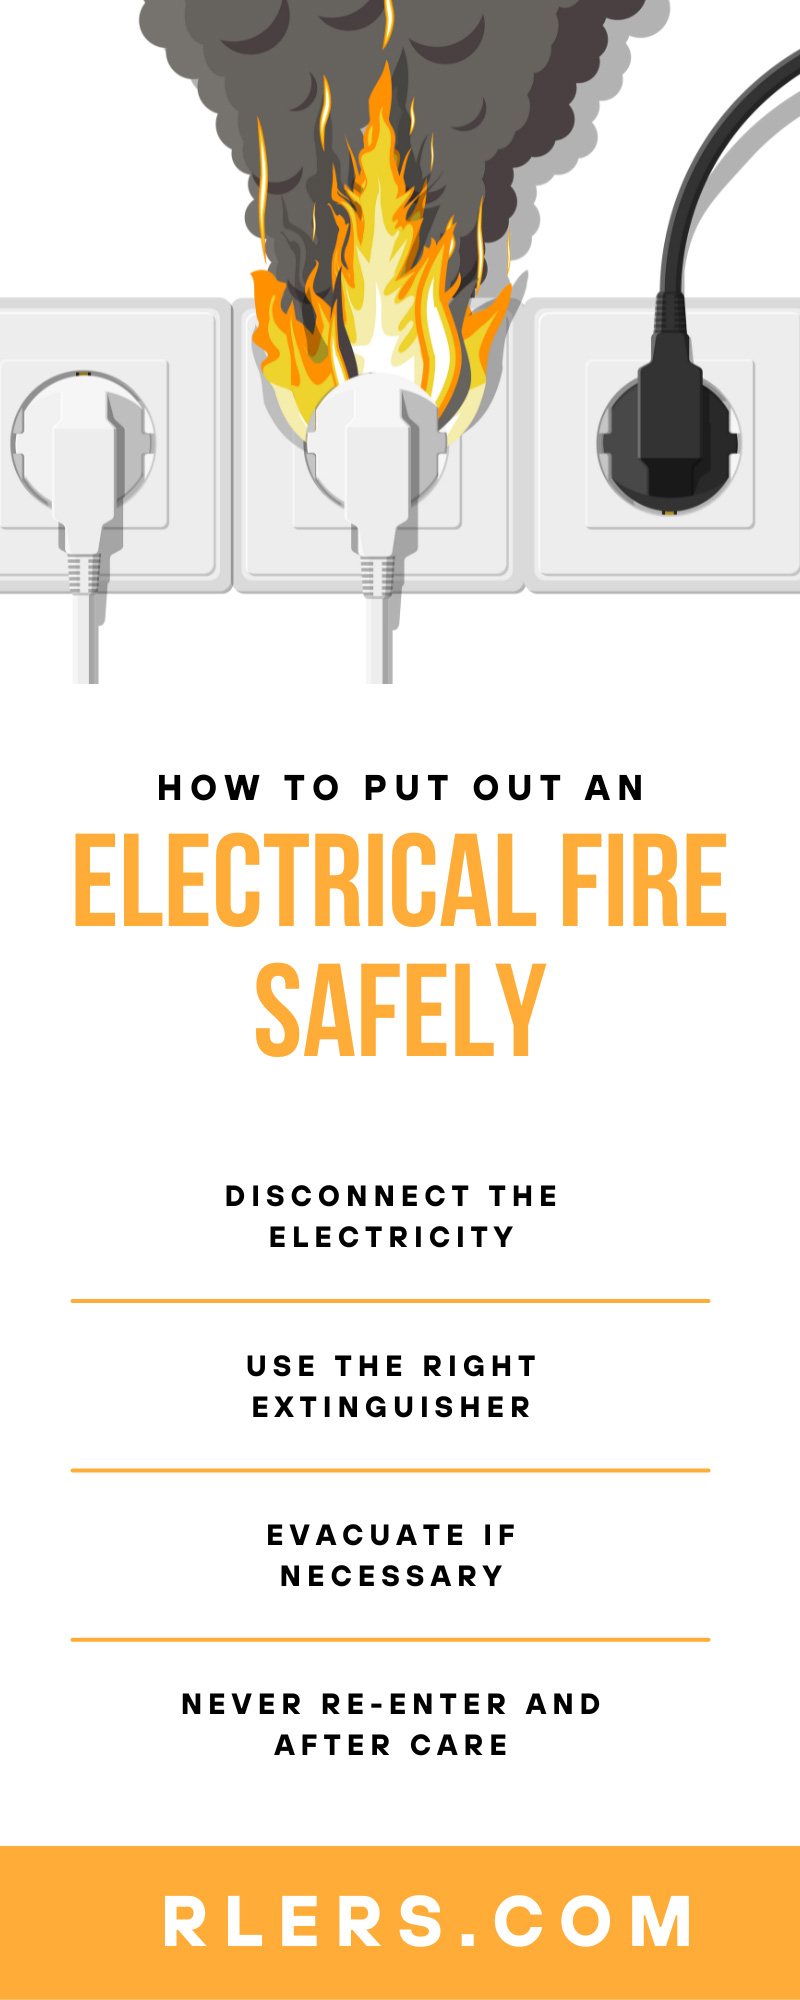 How To Put Out an Electrical Fire Safely 